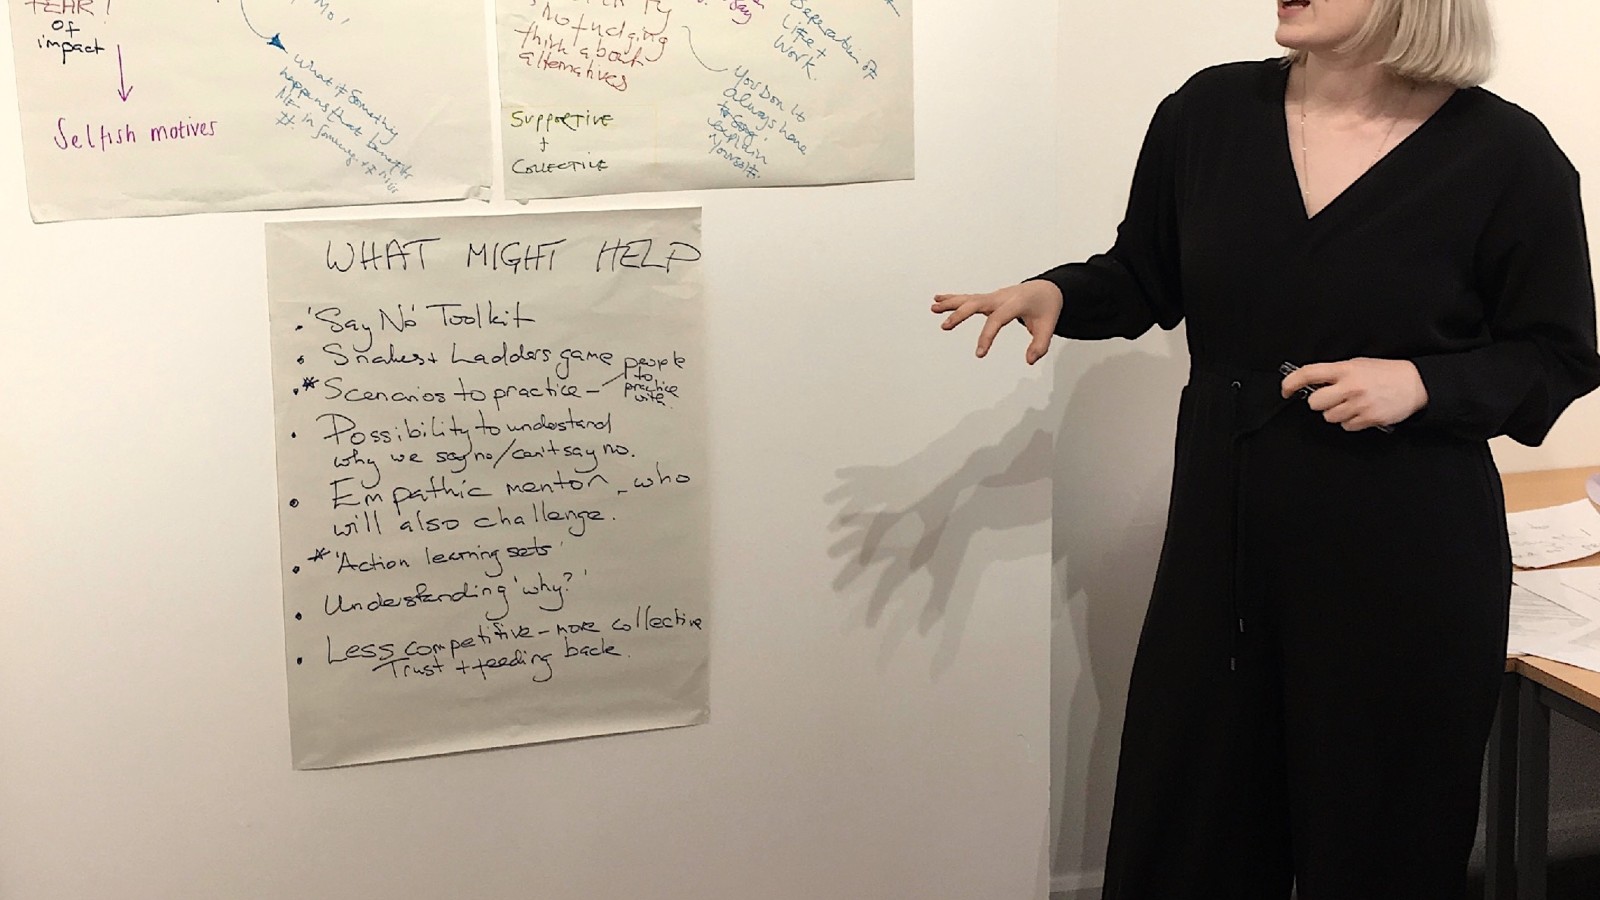 |A woman with a light blonde bob and wearing a black jumpsuit stands looking at 3 mindmaps on the wall behind her.